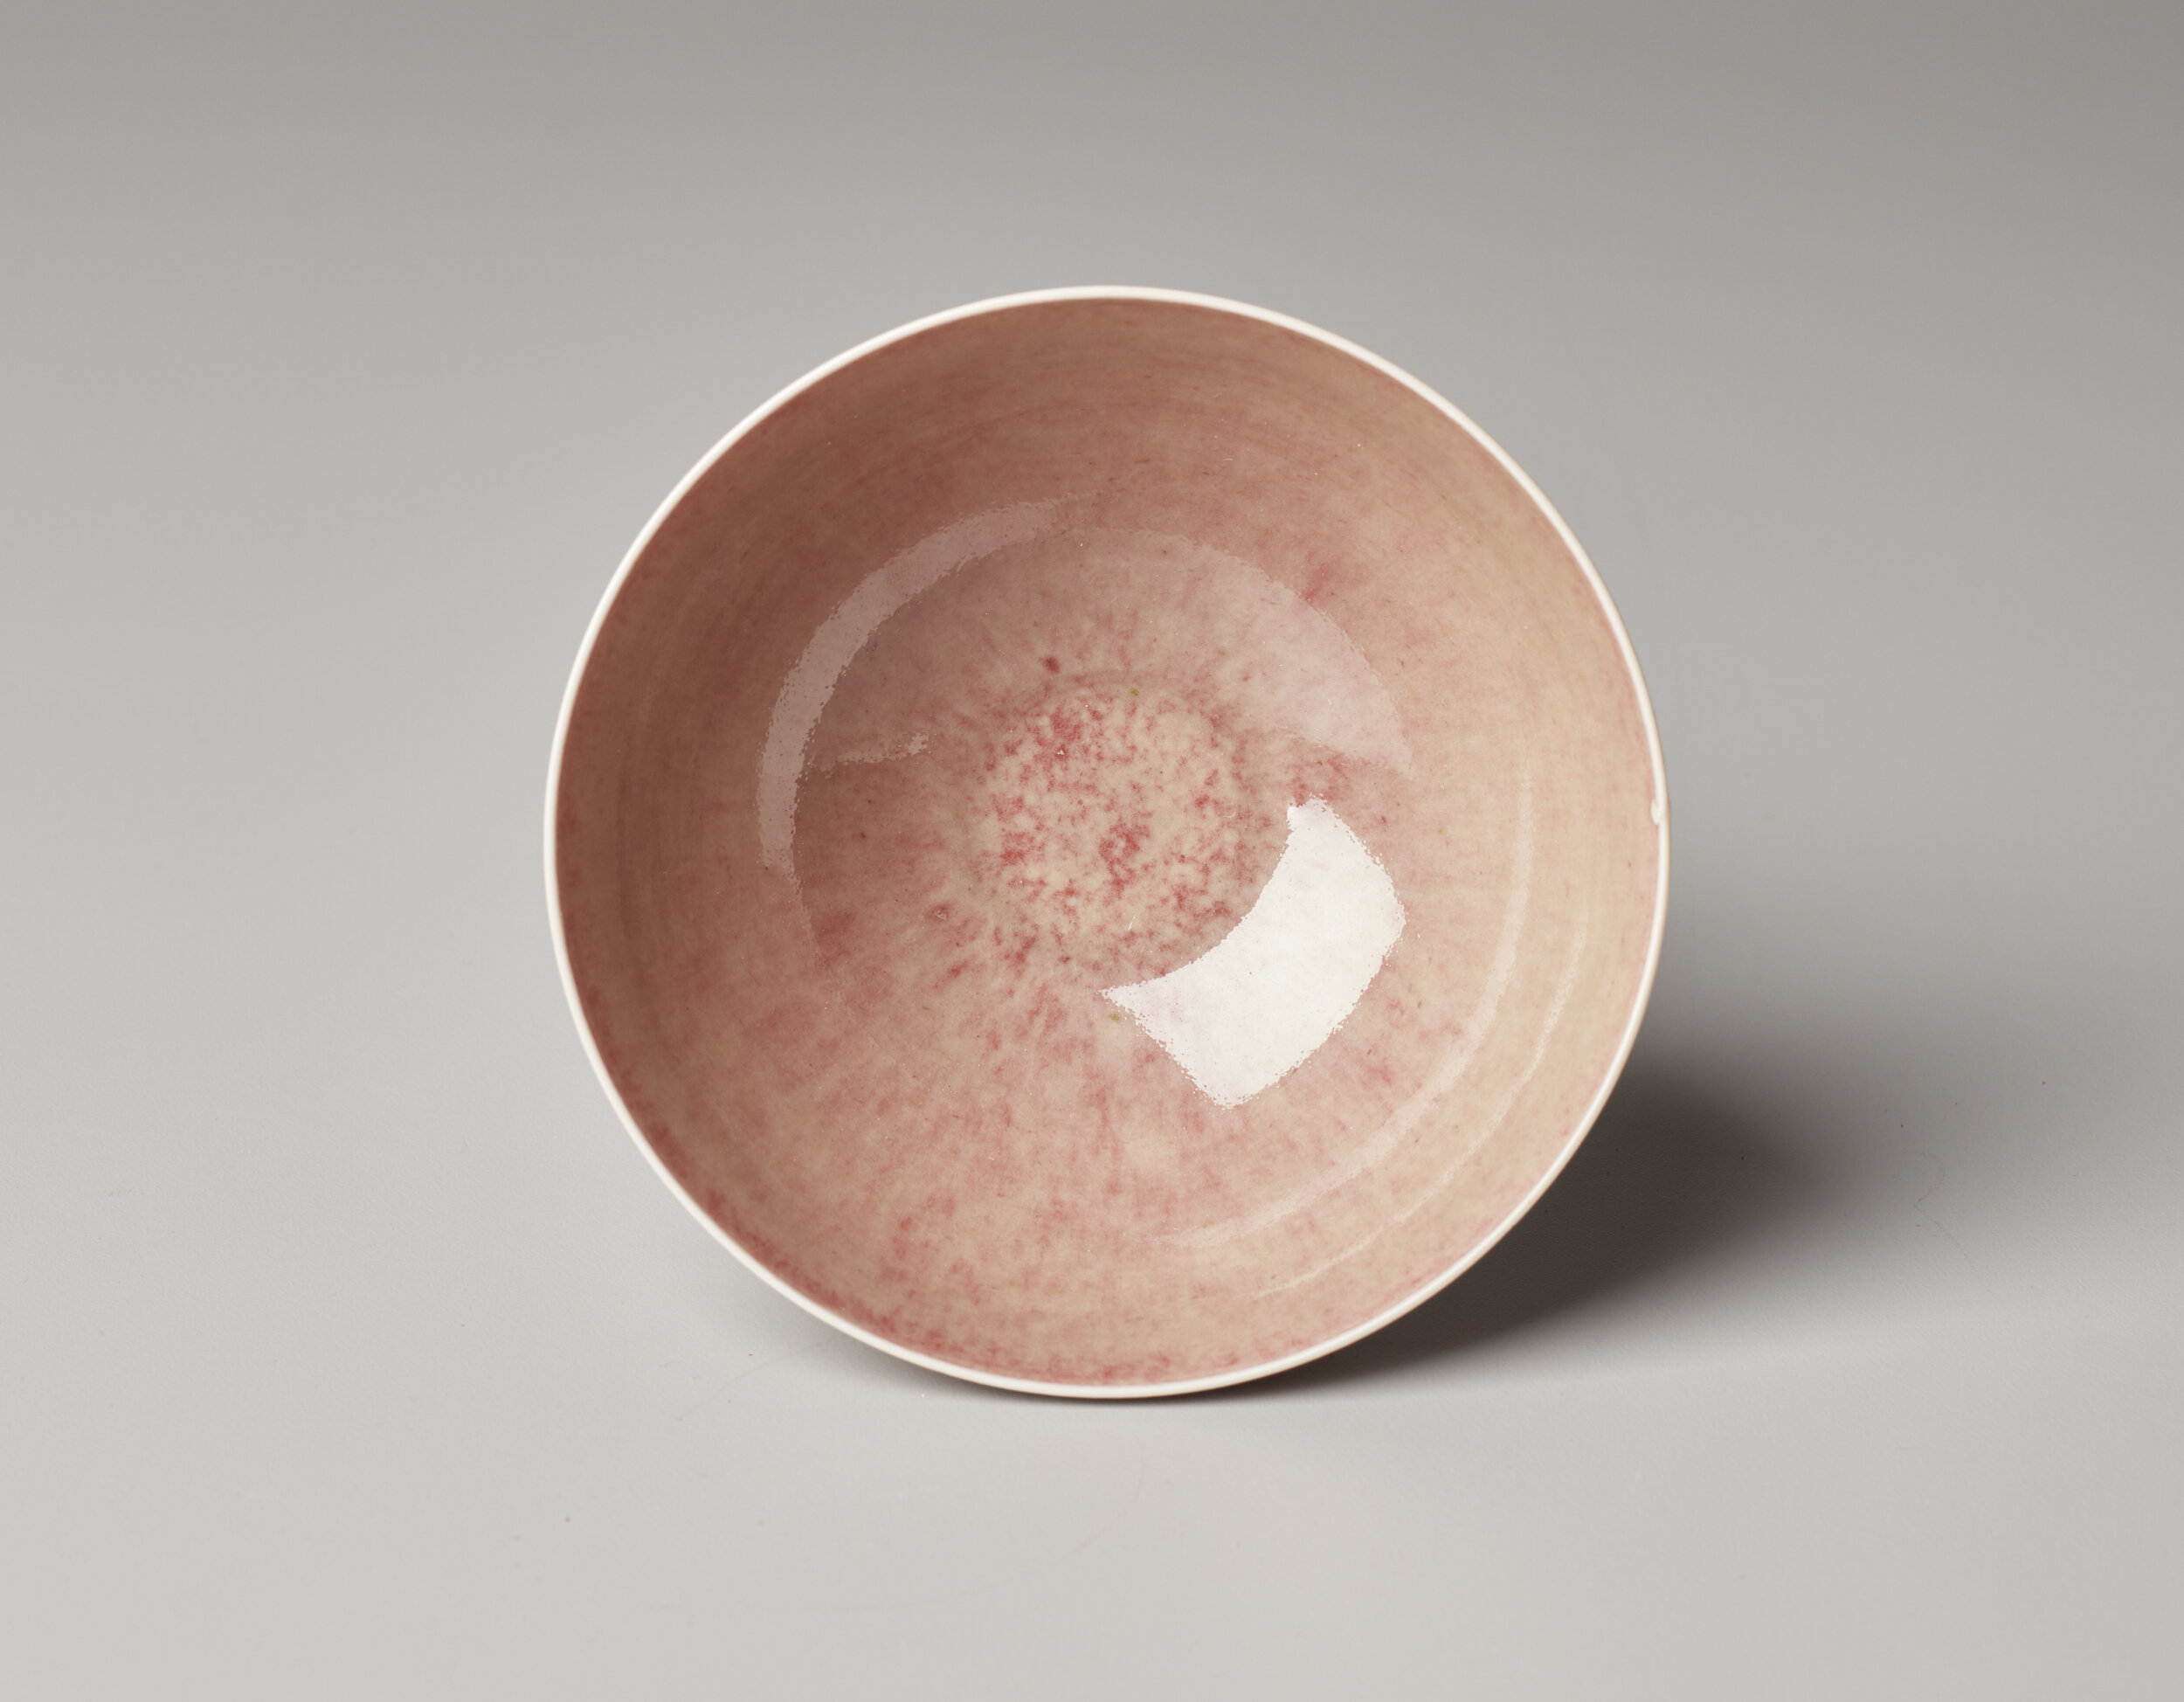  China, Jiangxi province, Jingdezhen kilns, Peachbloom-glazed bowl, 19th century, porcelain with "peachbloom" glaze (copper red with mottled moss green), Gift of Virginia Nelson, public domain, 1996.5. 